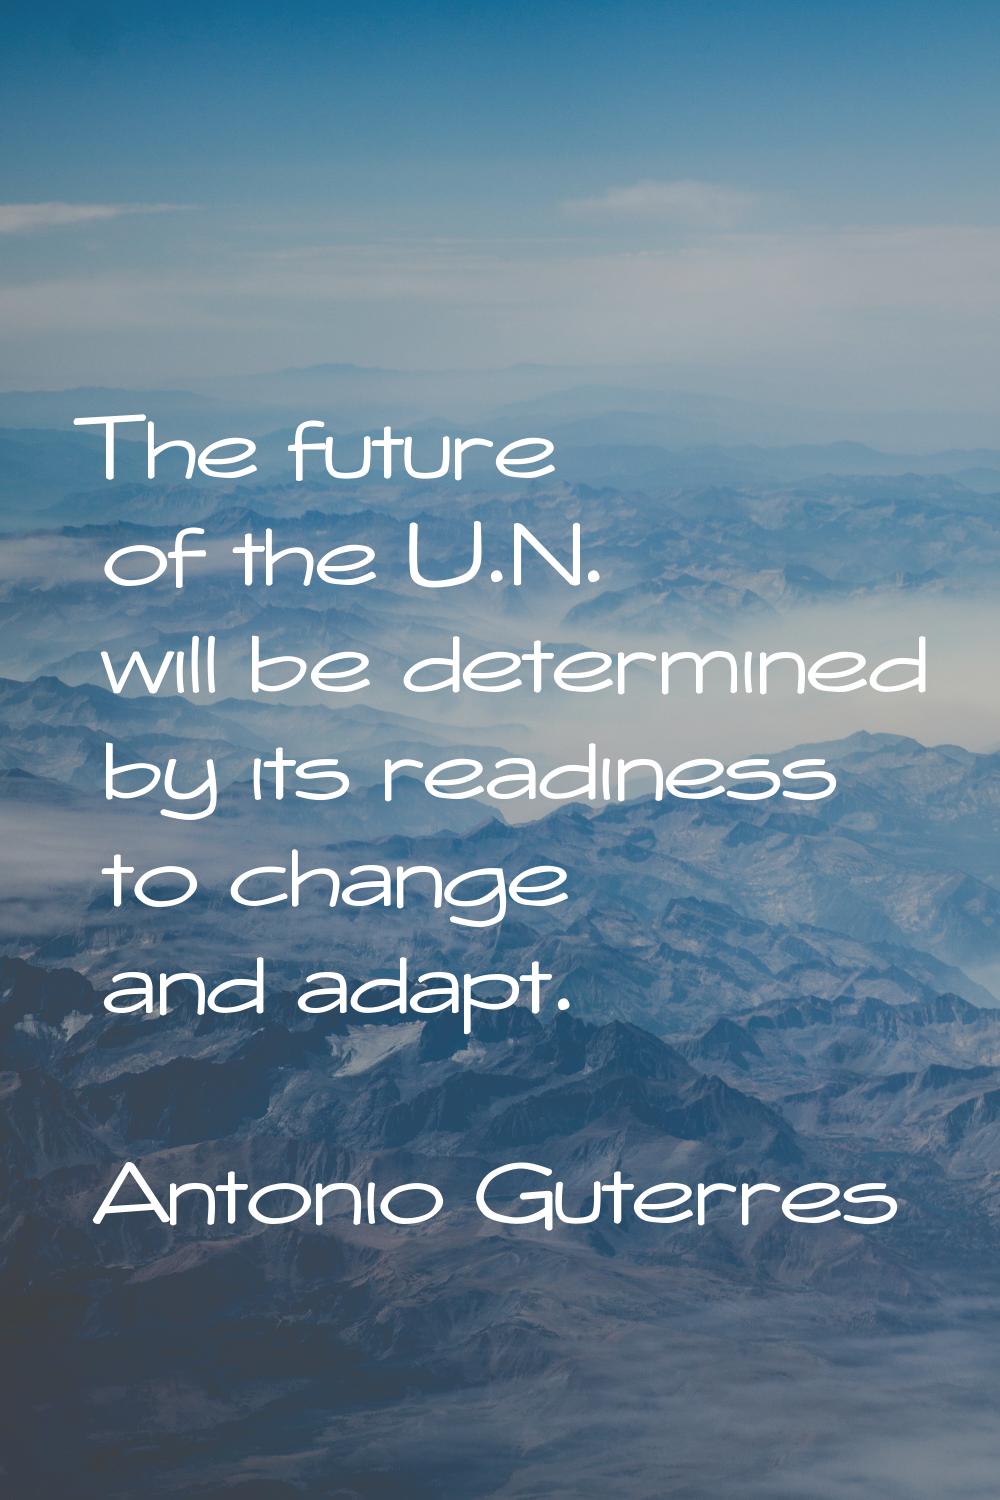 The future of the U.N. will be determined by its readiness to change and adapt.